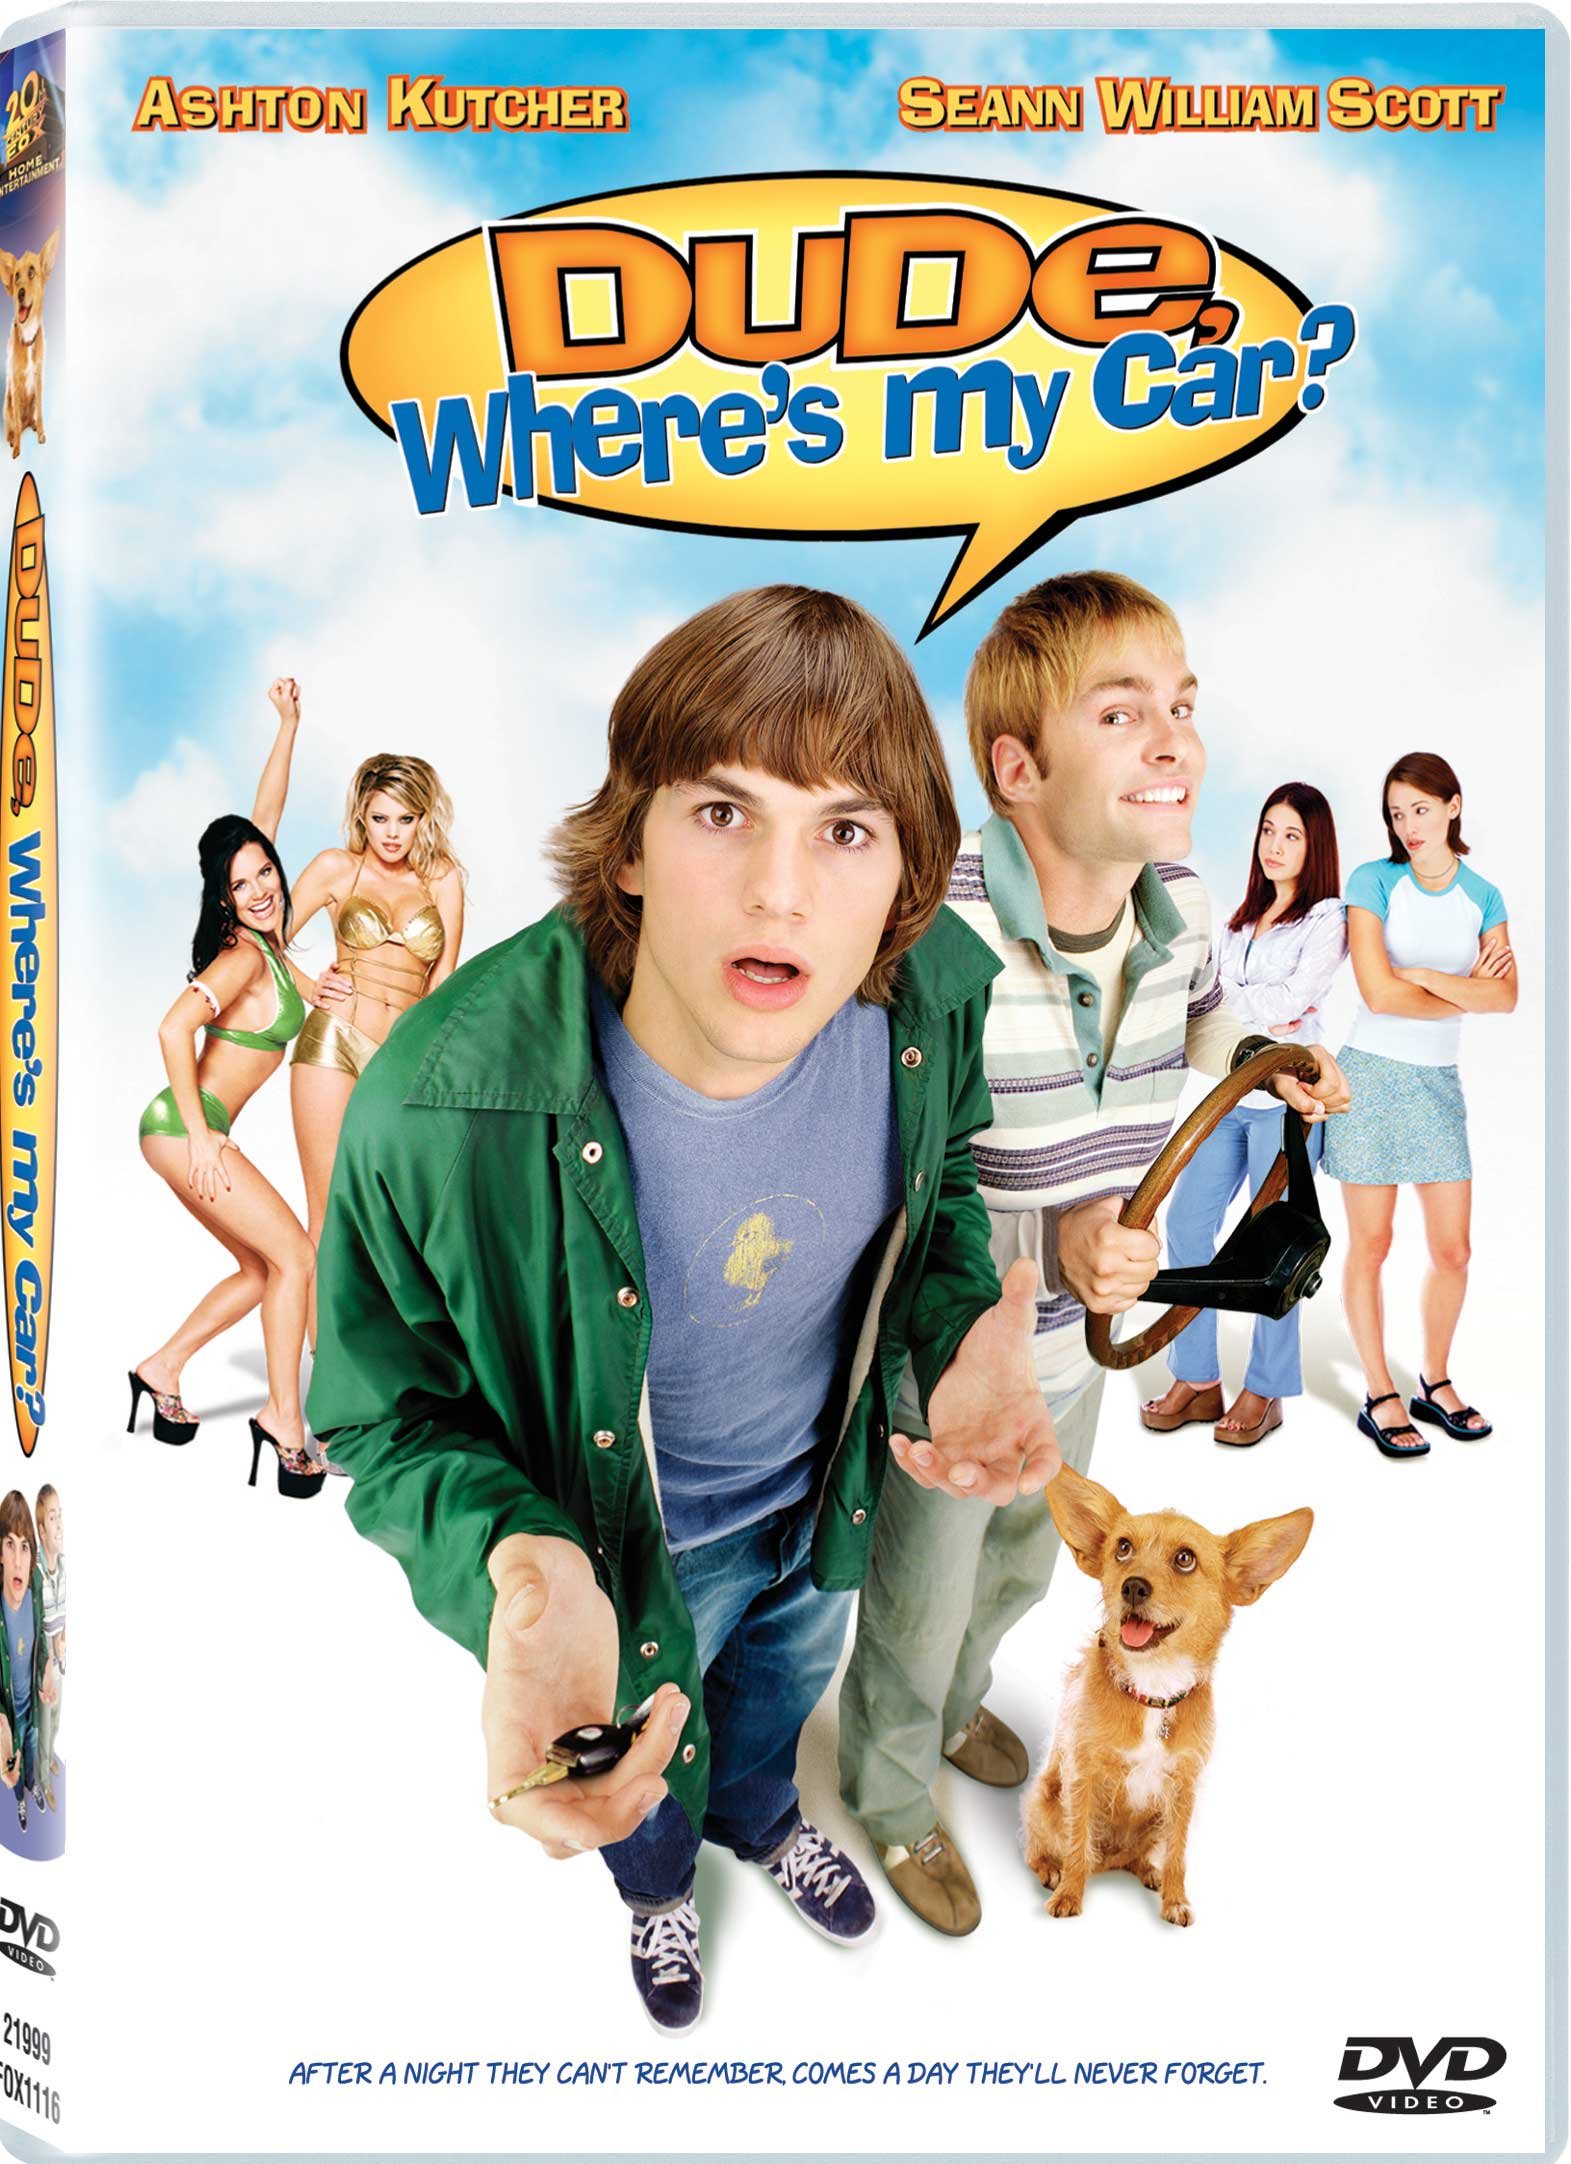 dude-wheres-my-car-movie-purchase-or-watch-online